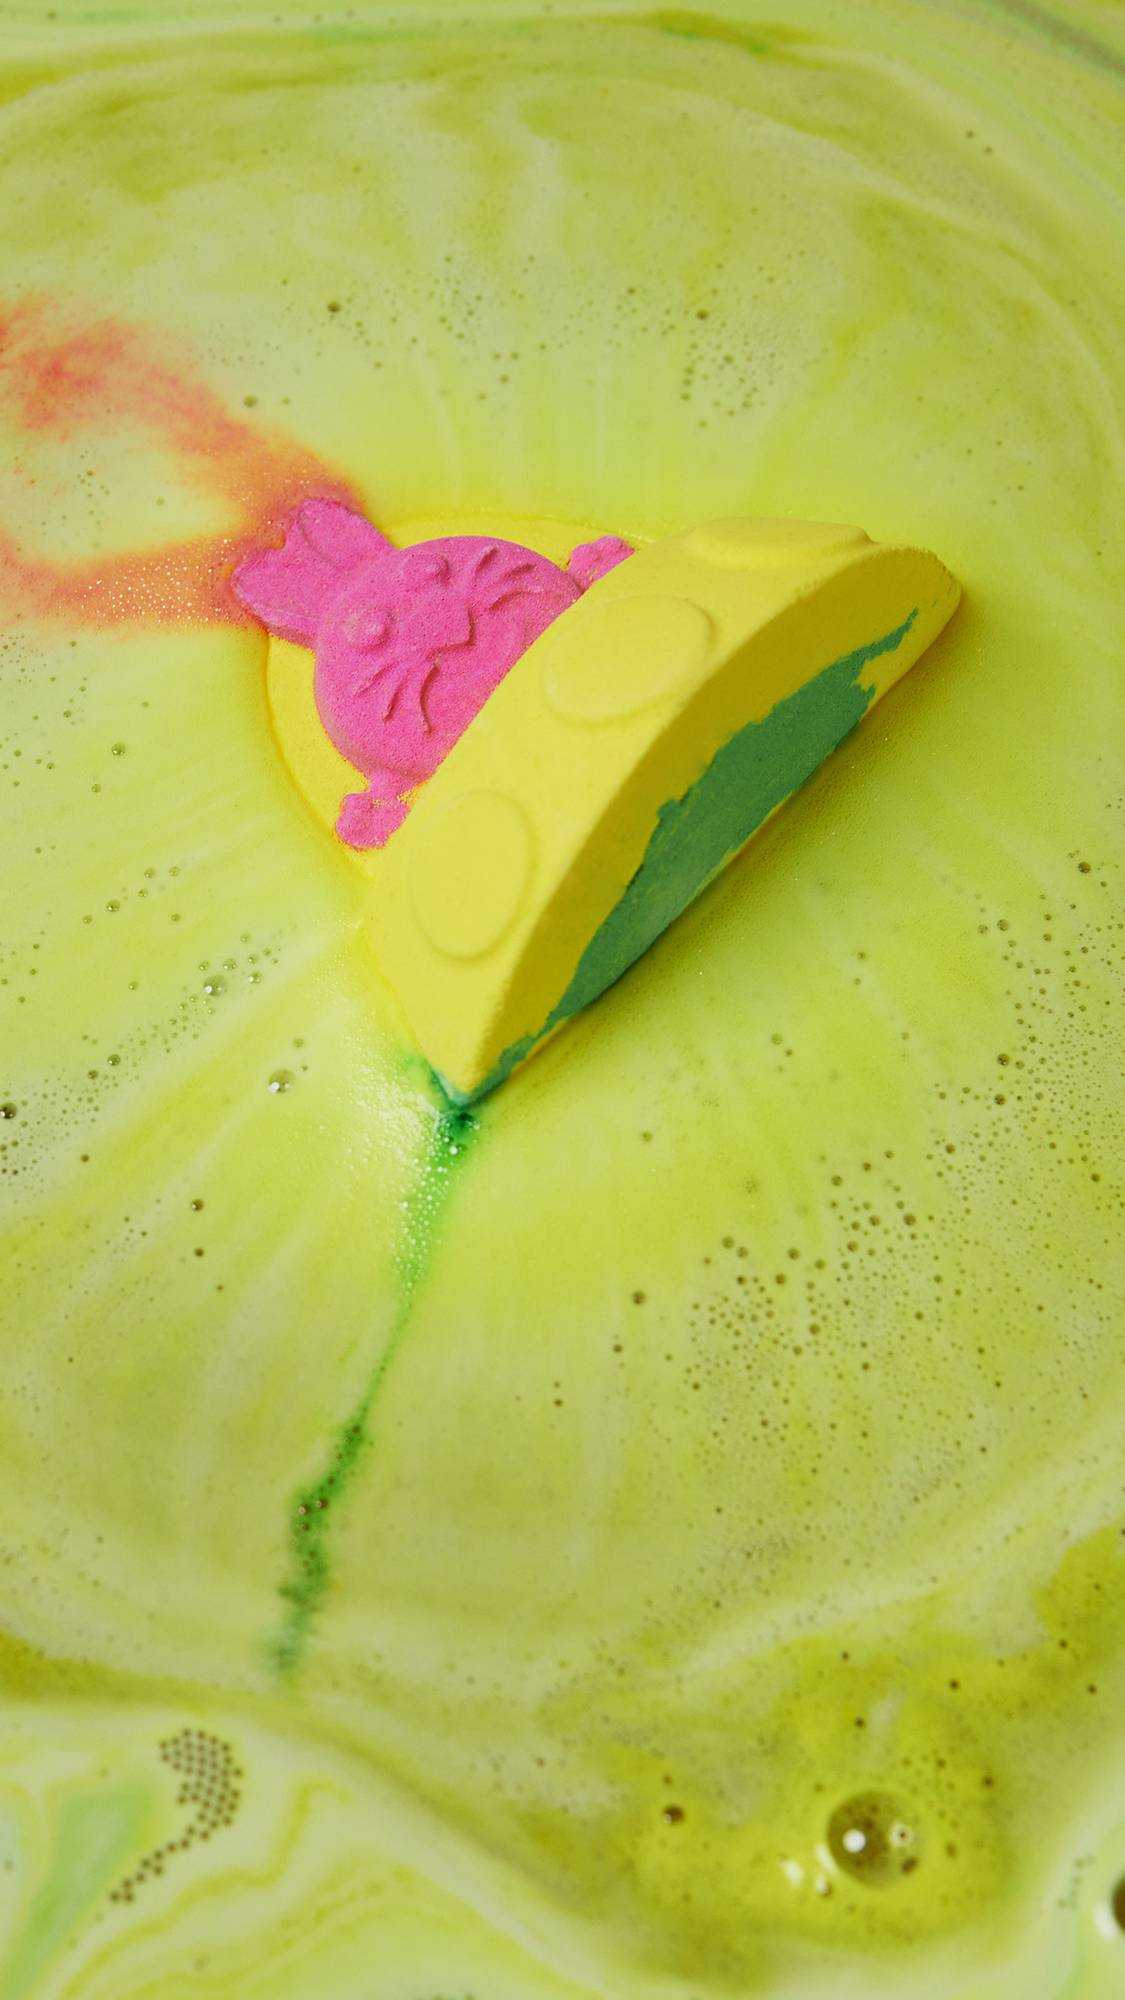 Alien Bunny Spaceship lays flay in the bath water shooting off foamy swirls of bright yellow and pink.